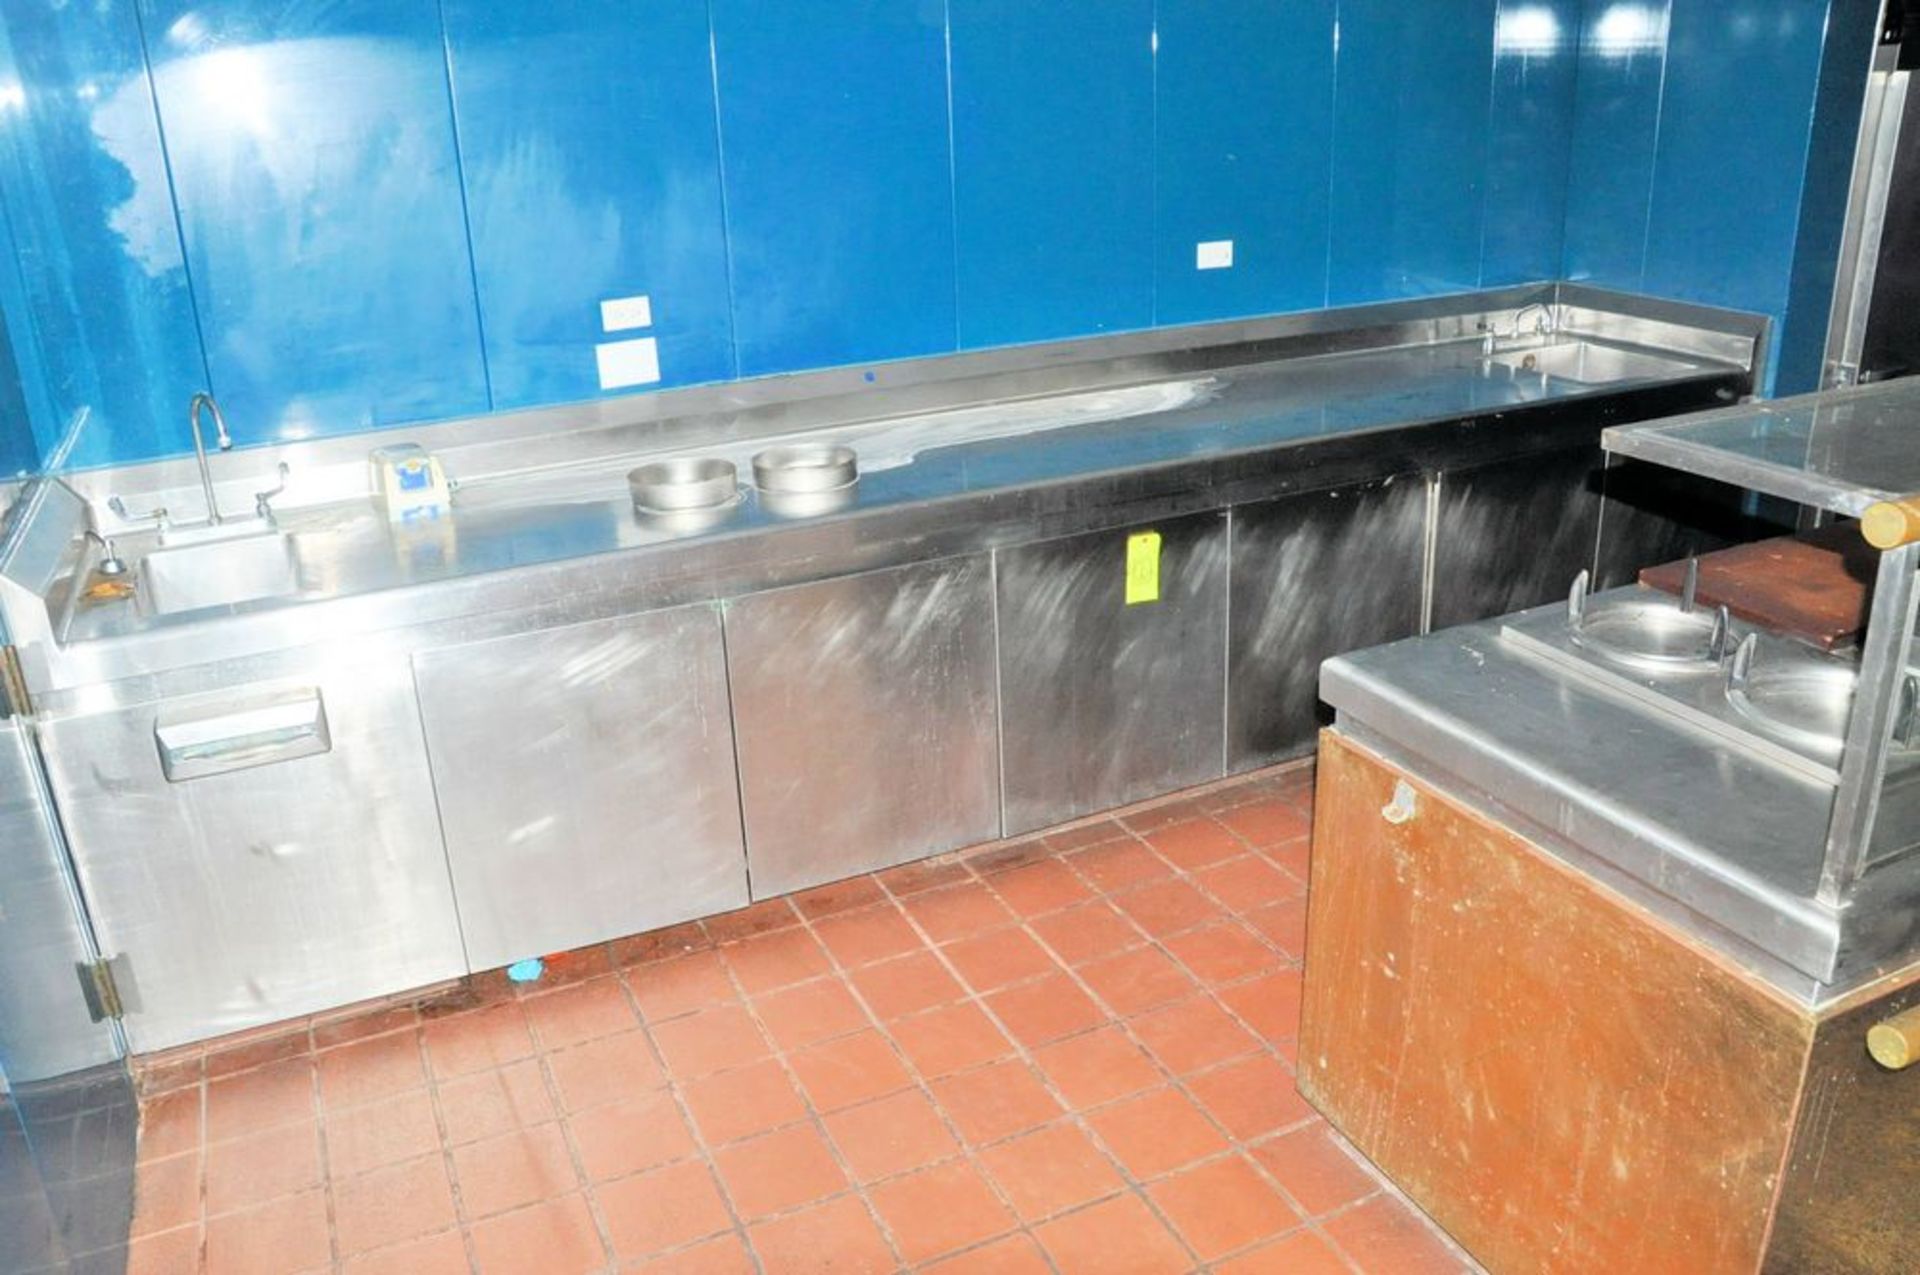 Stainless Steel Back Counter with Under Counter Enclosed Storage, 32" x 14' 6", (Main Kitchen Area), - Image 2 of 7